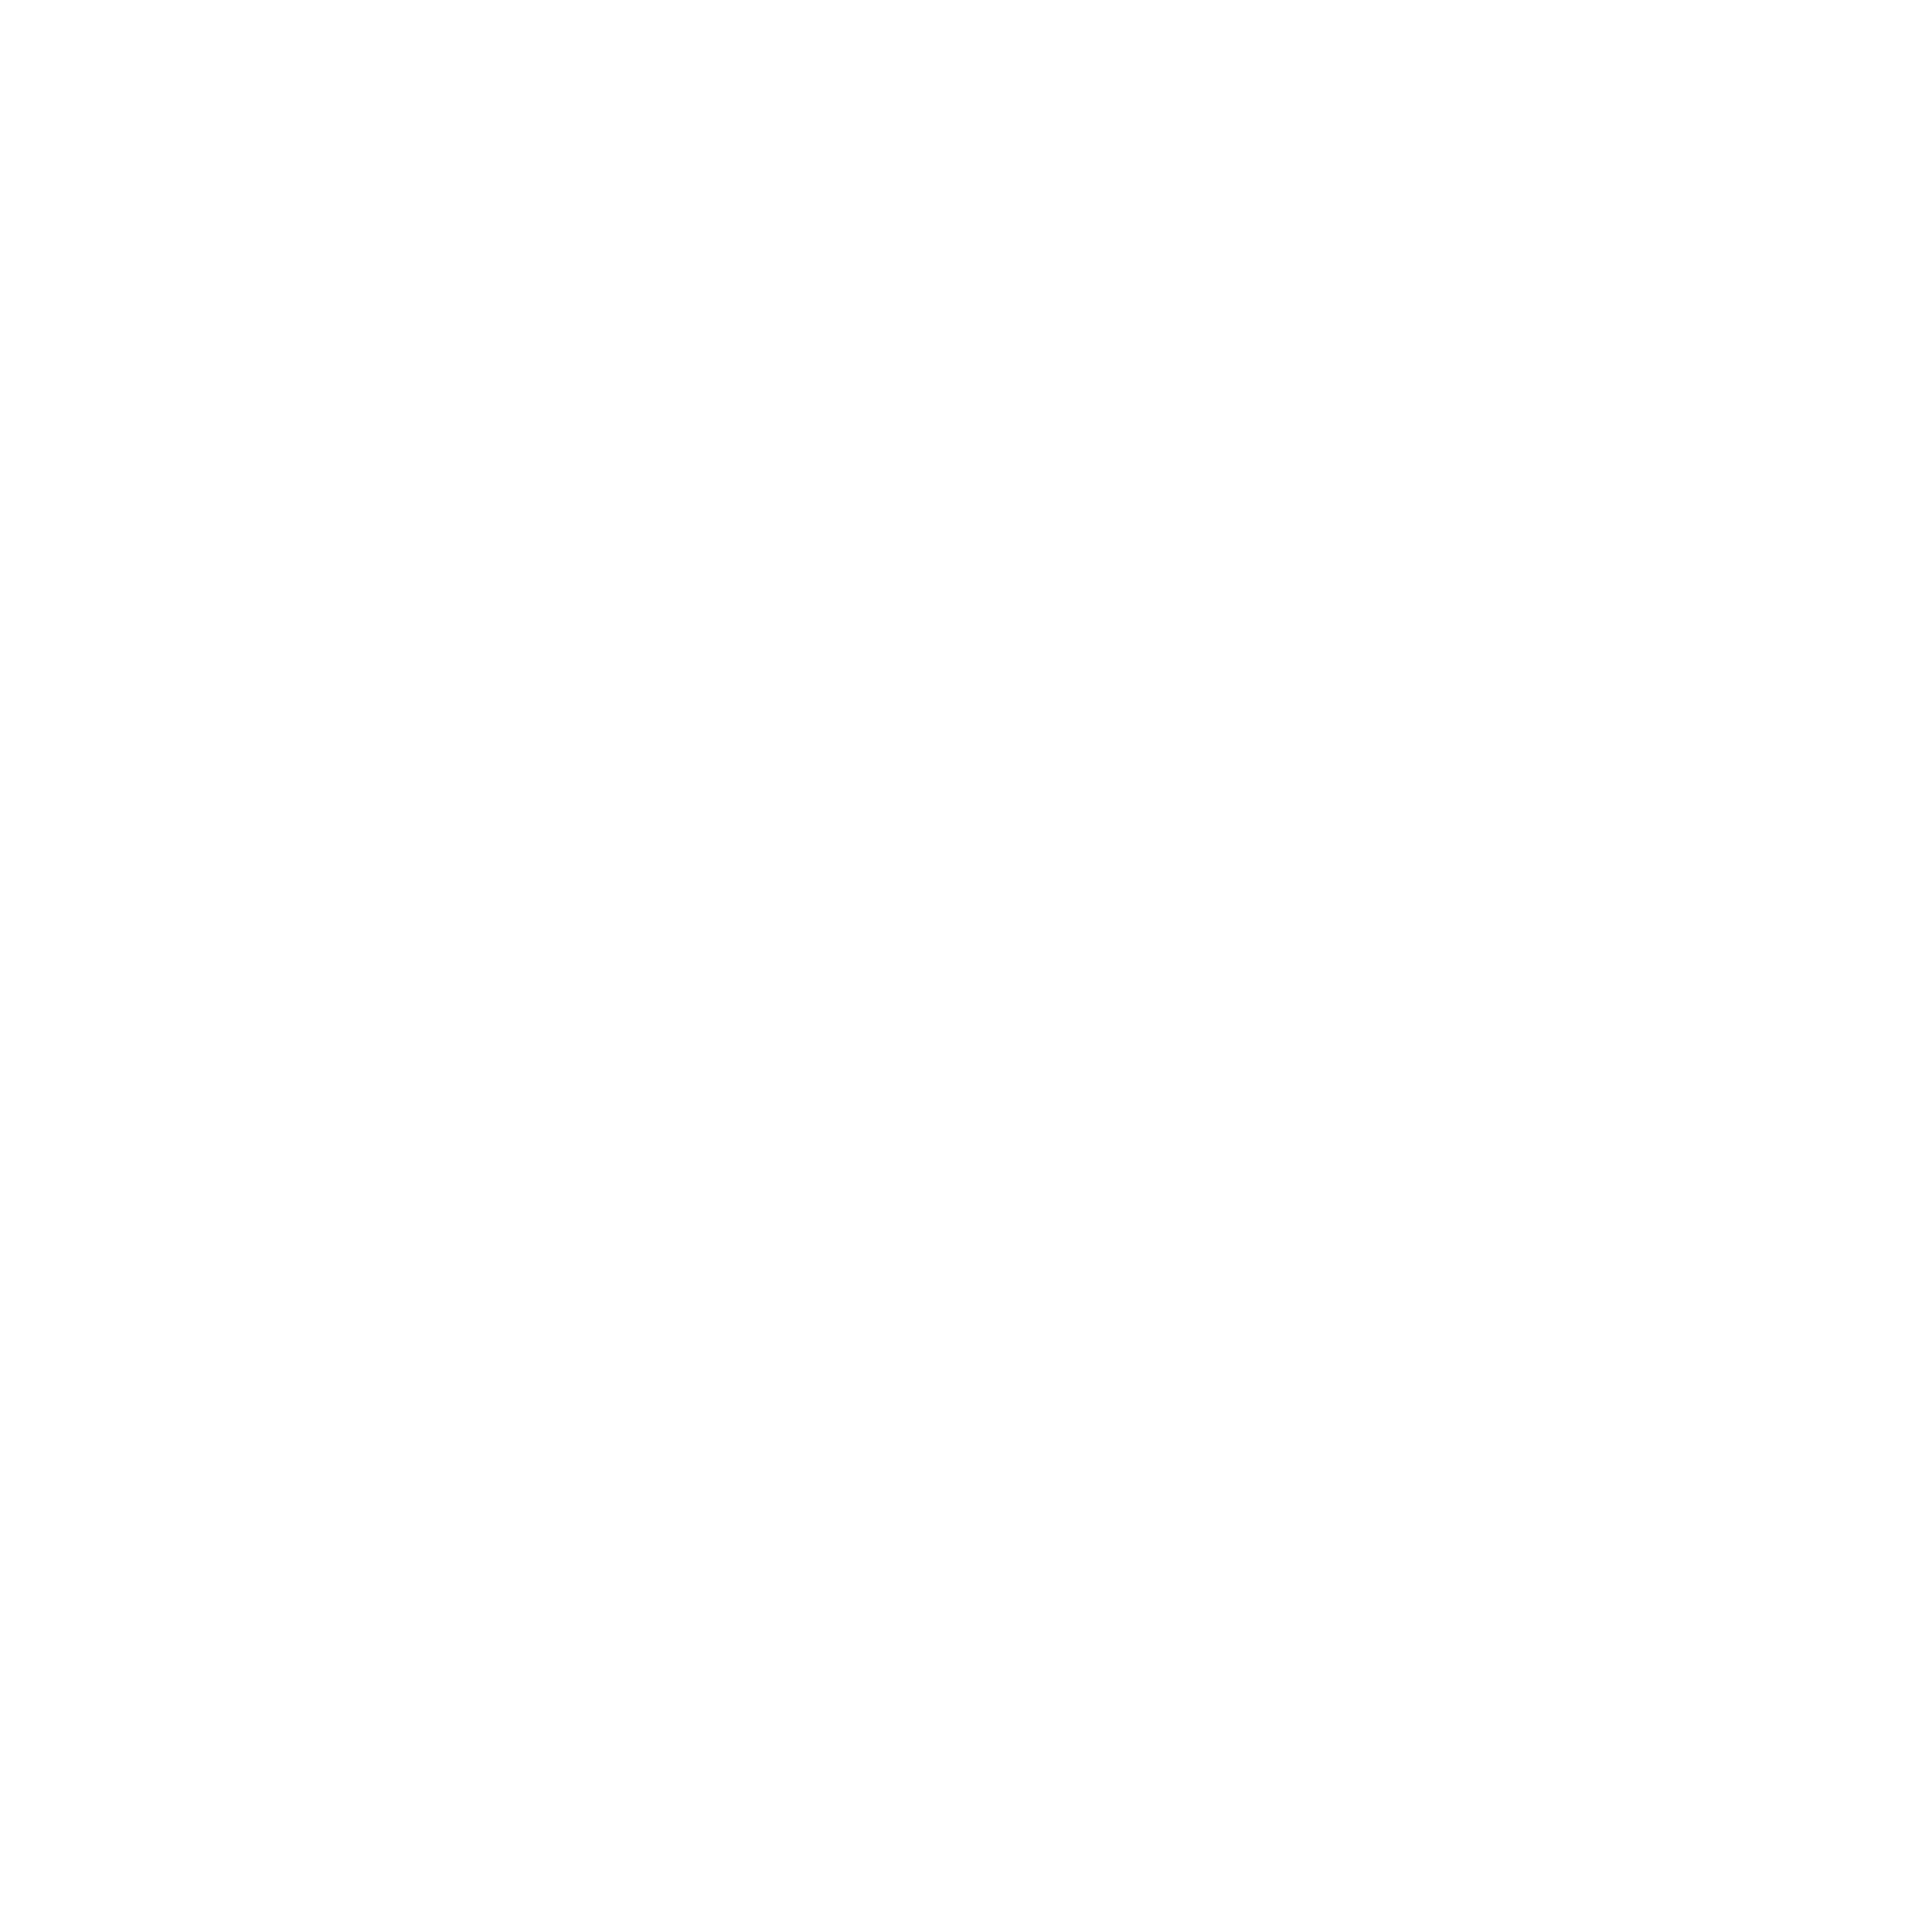 From Suzie’s